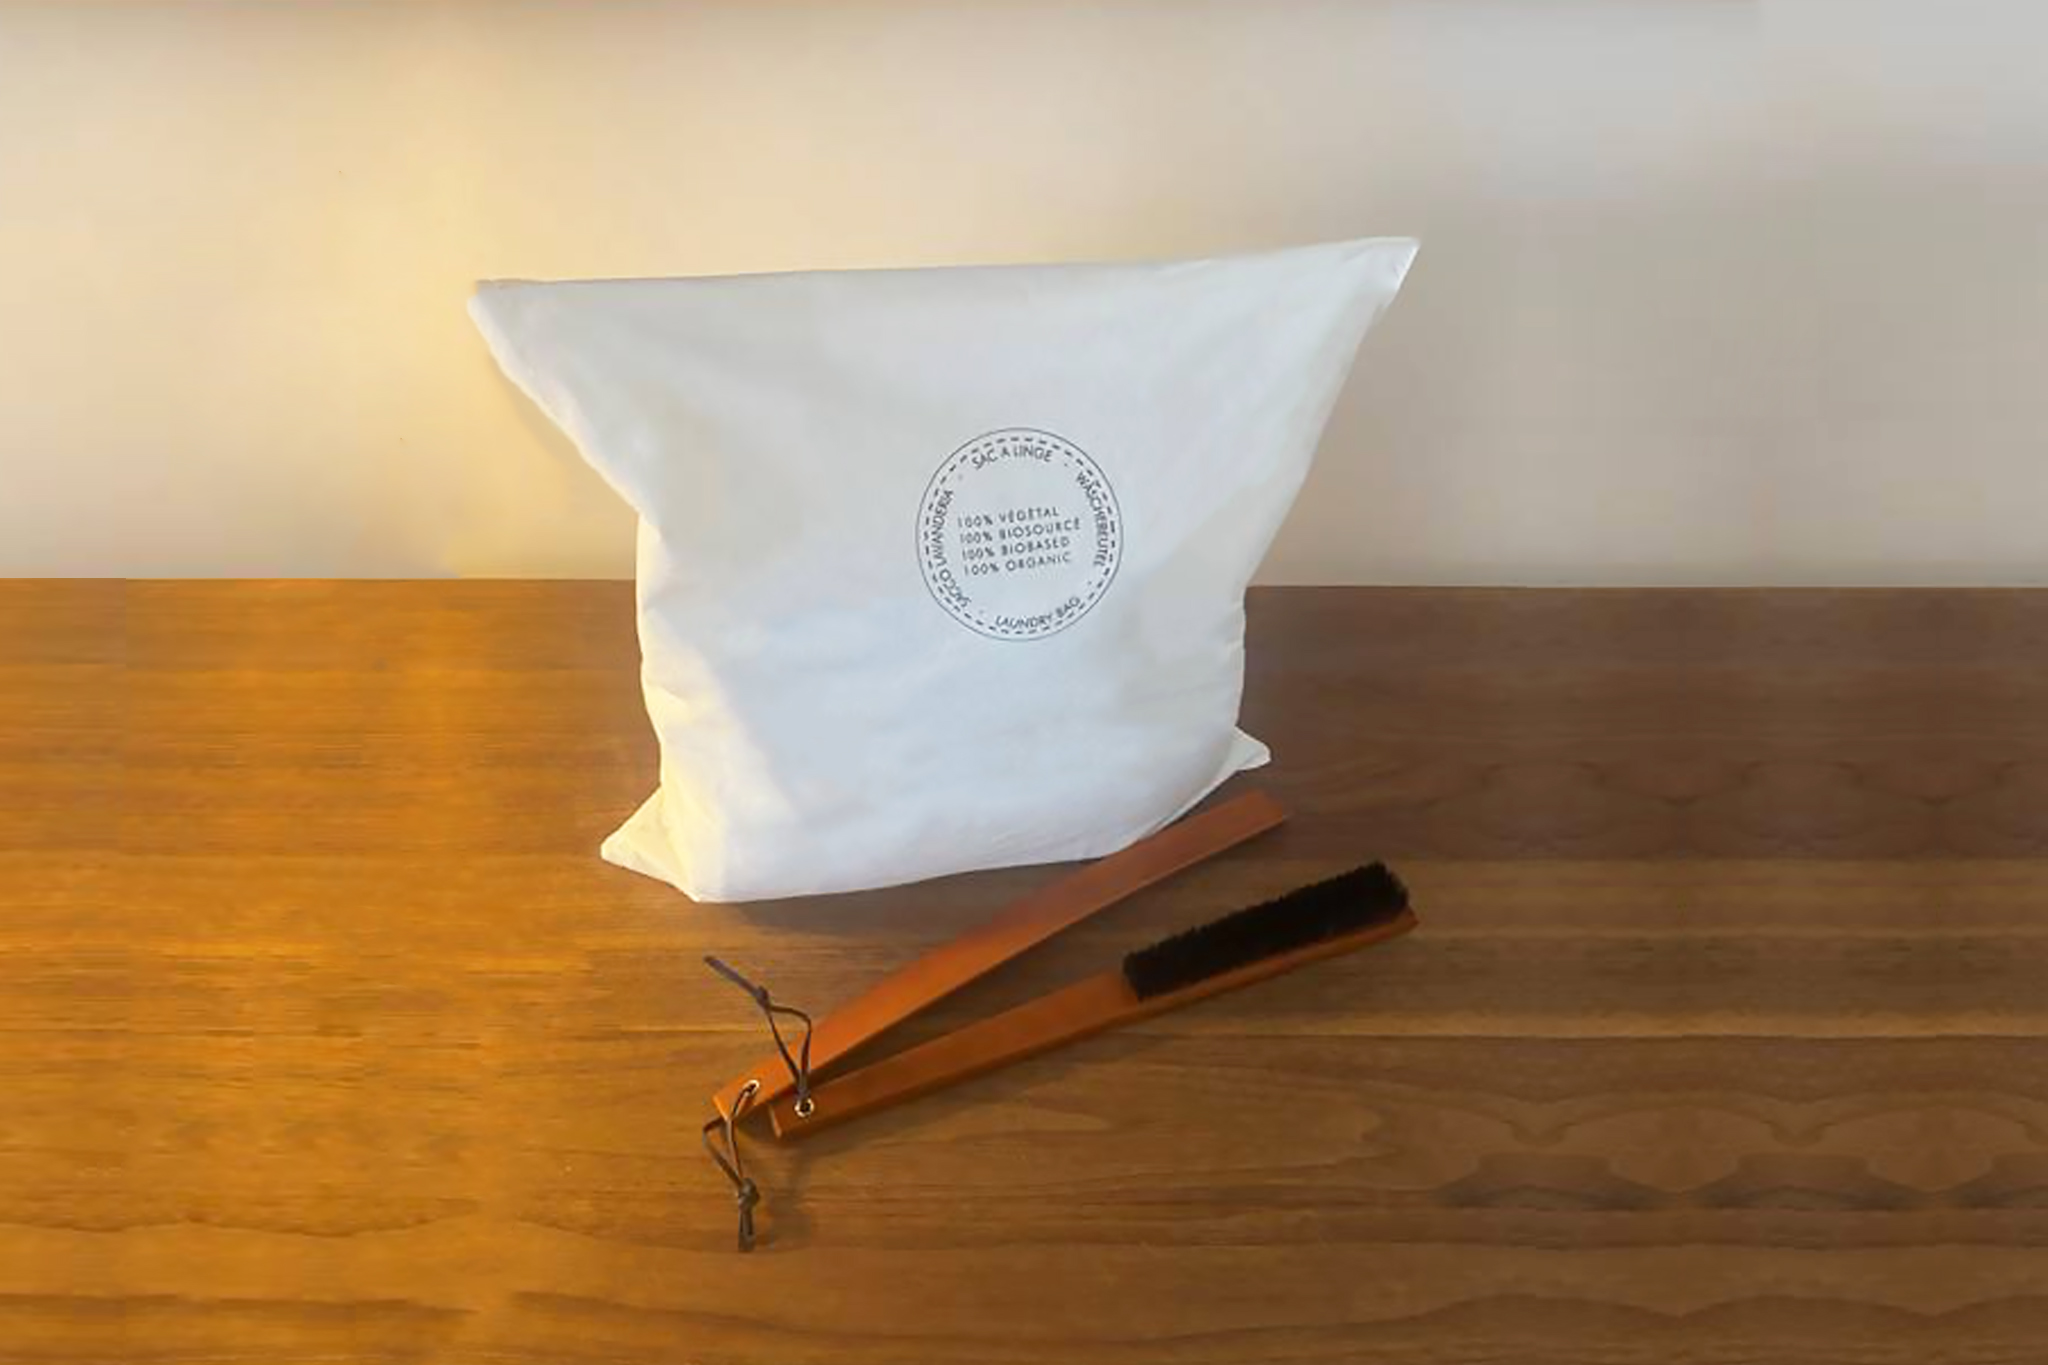 eco-responsible laundry bags